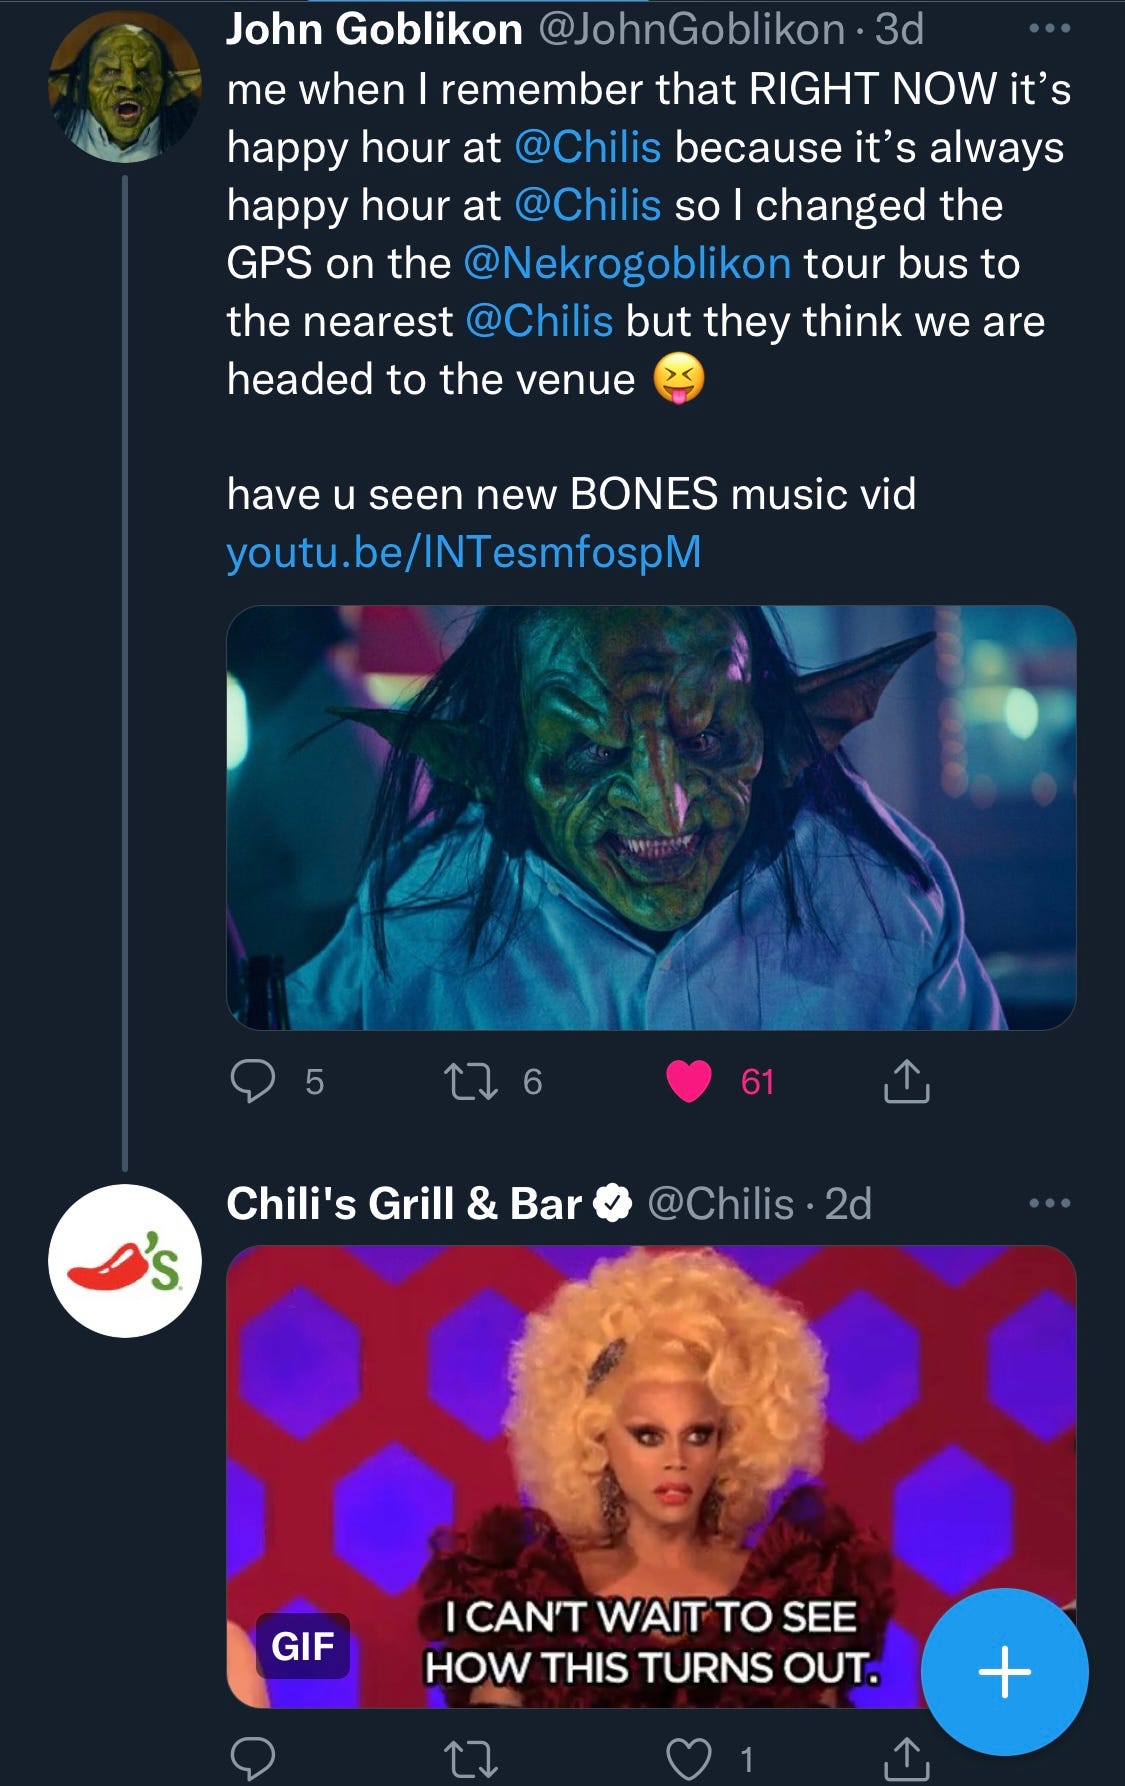 Pros and Cons of Unsolicited Influencers: the Case Study of Chili’s and John Goblikon